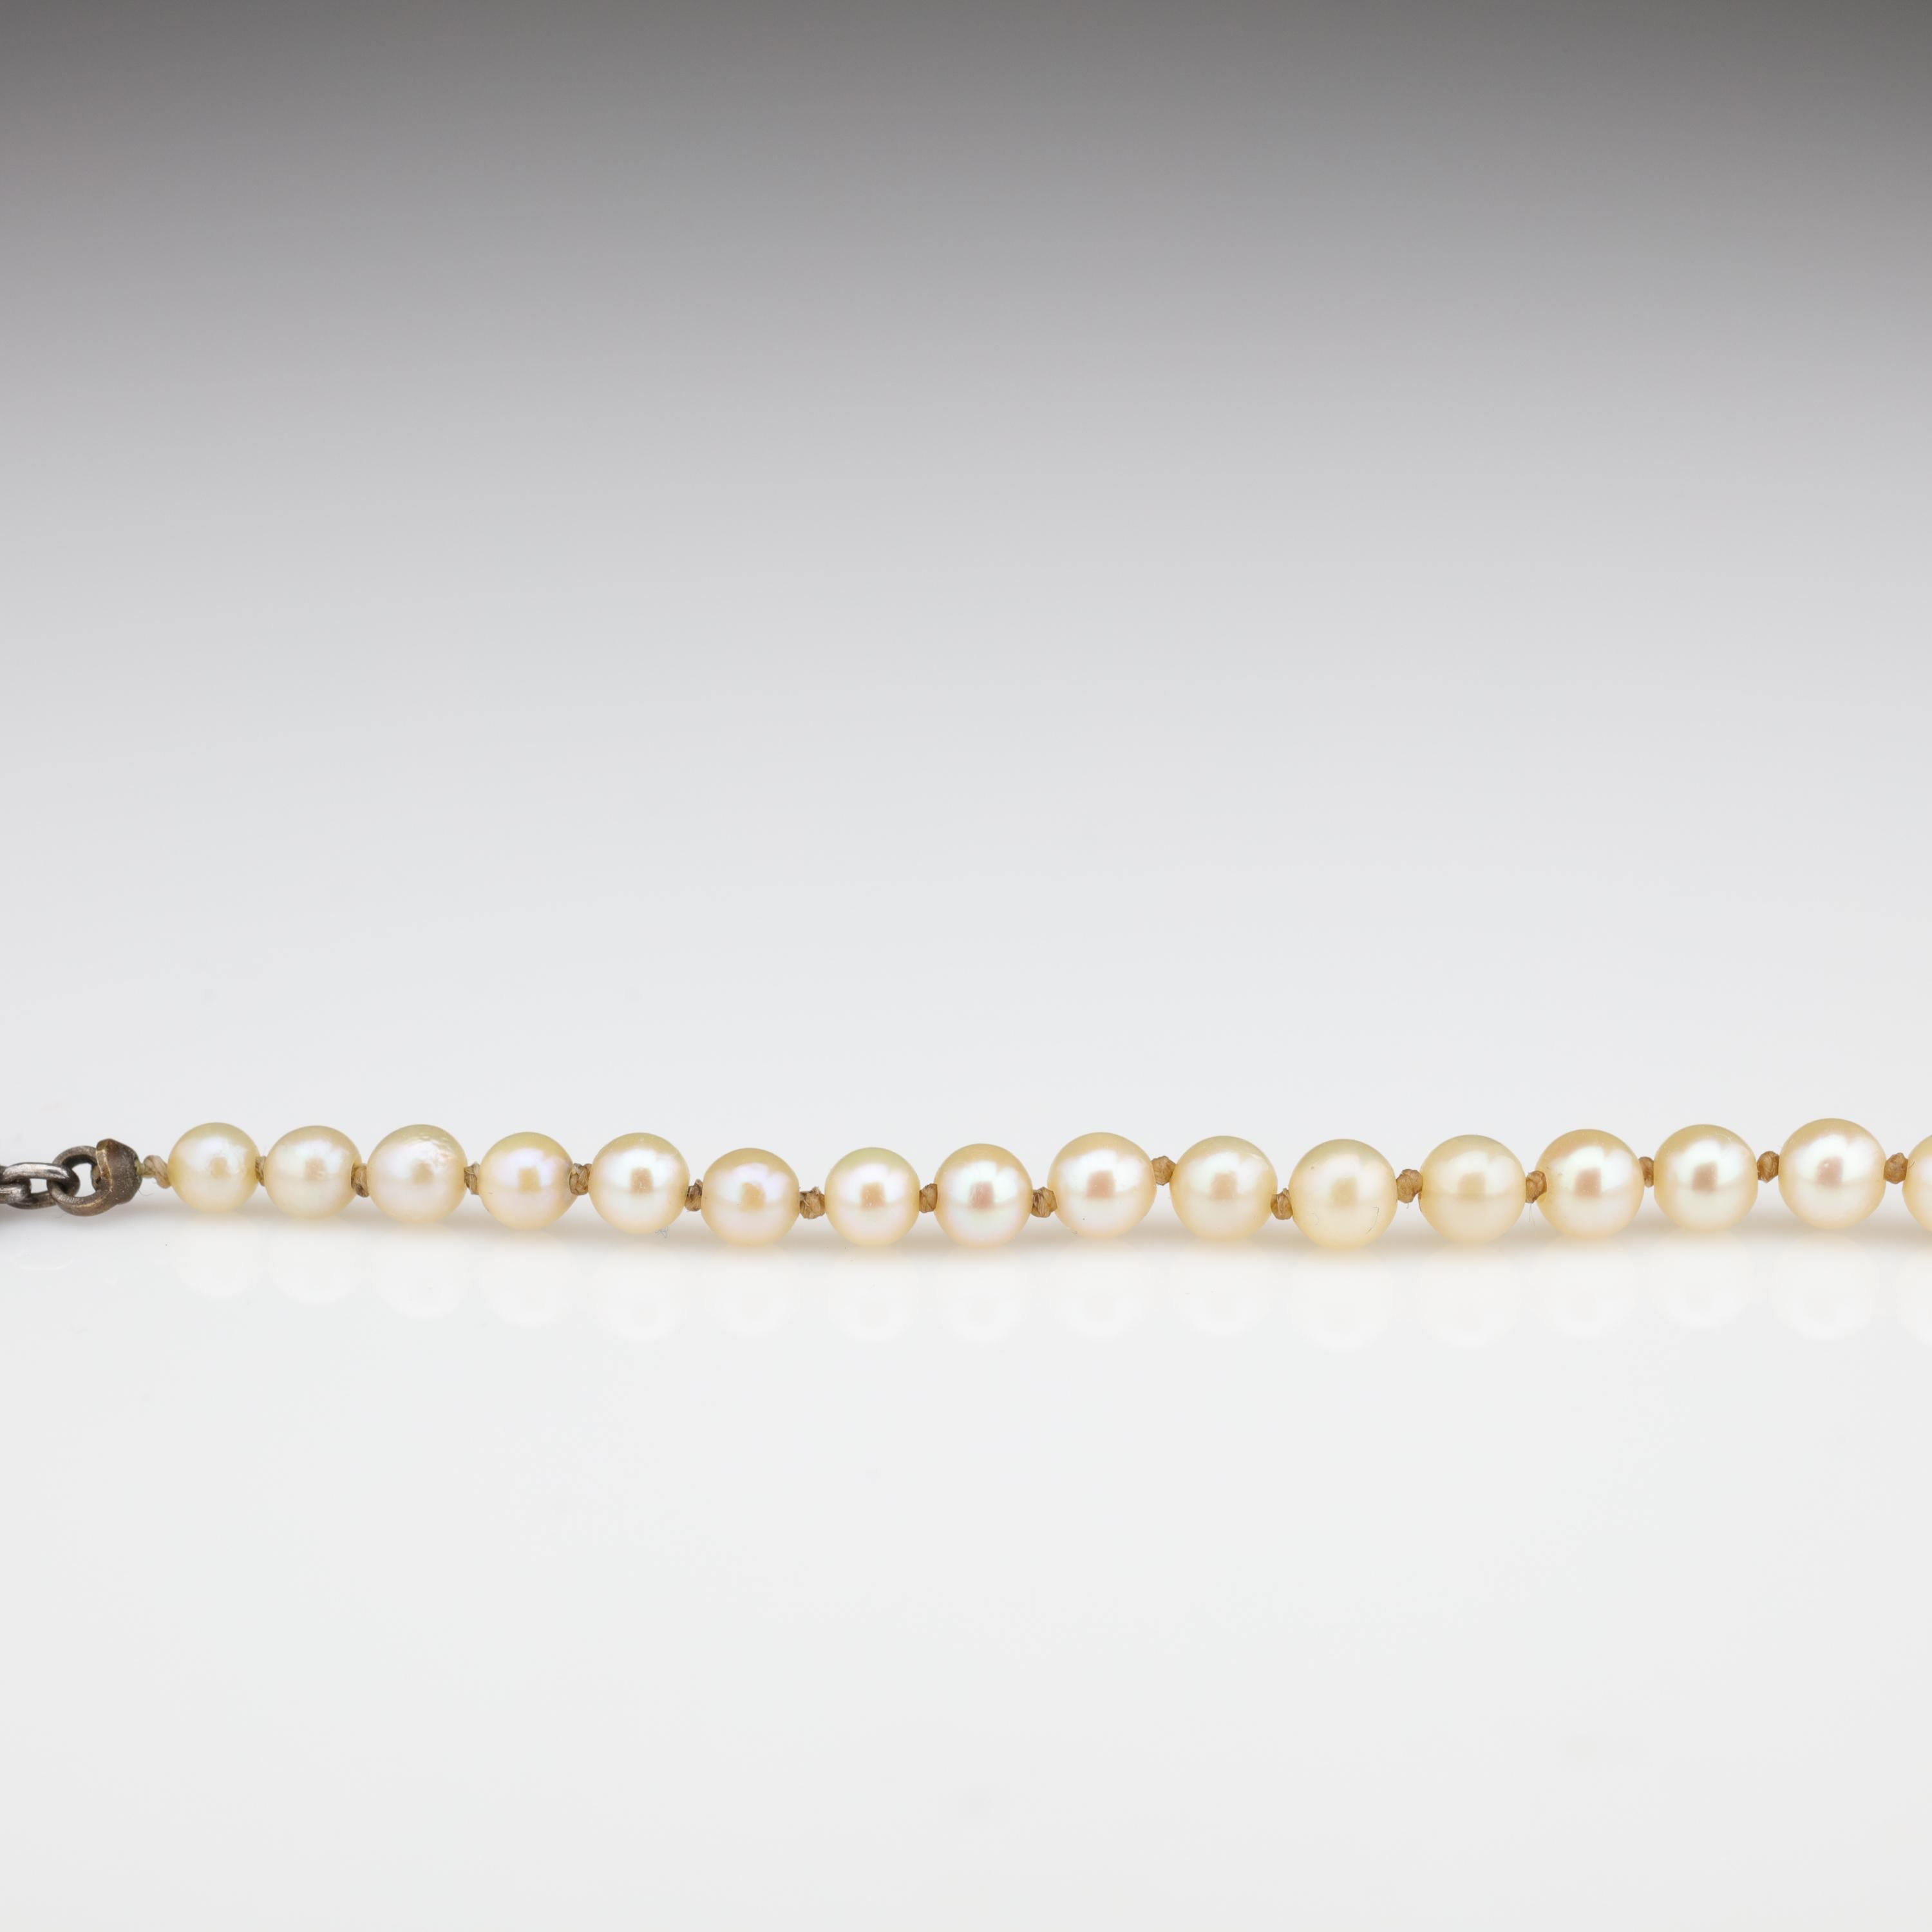 Women's or Men's Mikimoto Original Strand of First Viable Cultured Pearls, circa 1920s